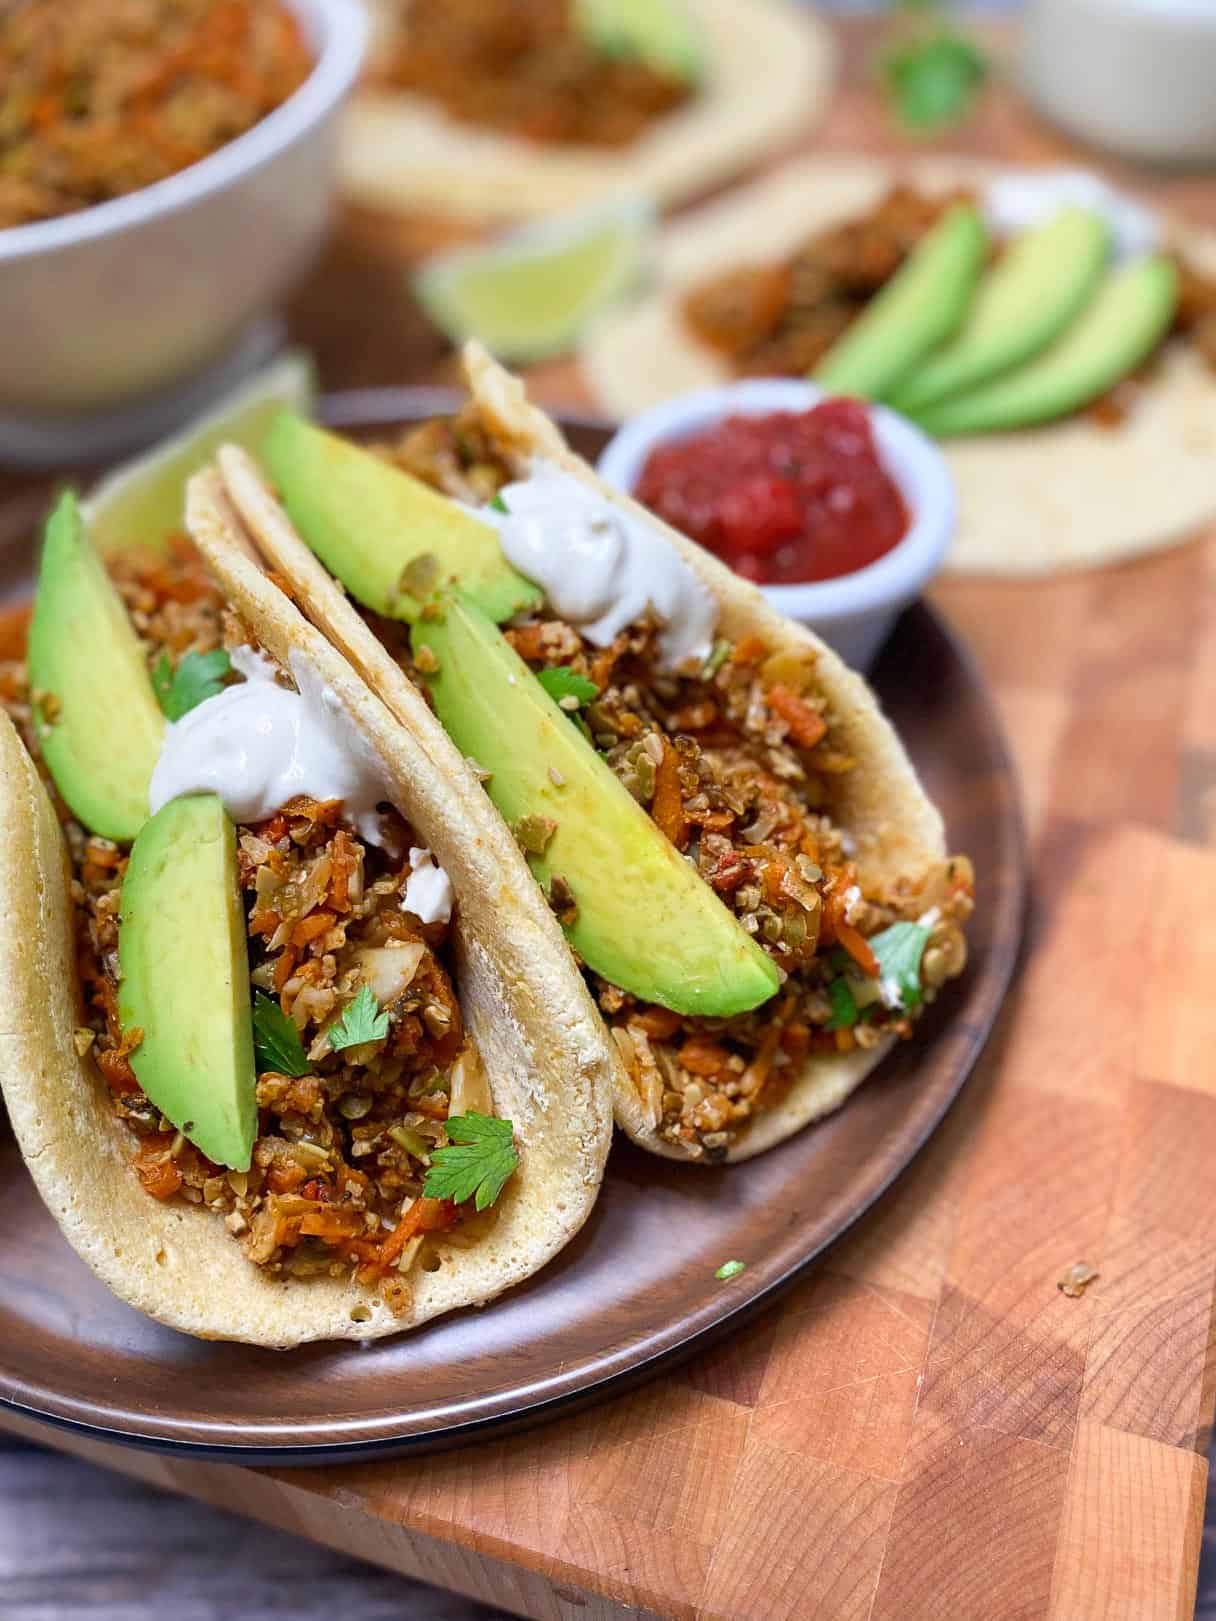 soft tacos on plate with avocado garnish and salsa for dipping